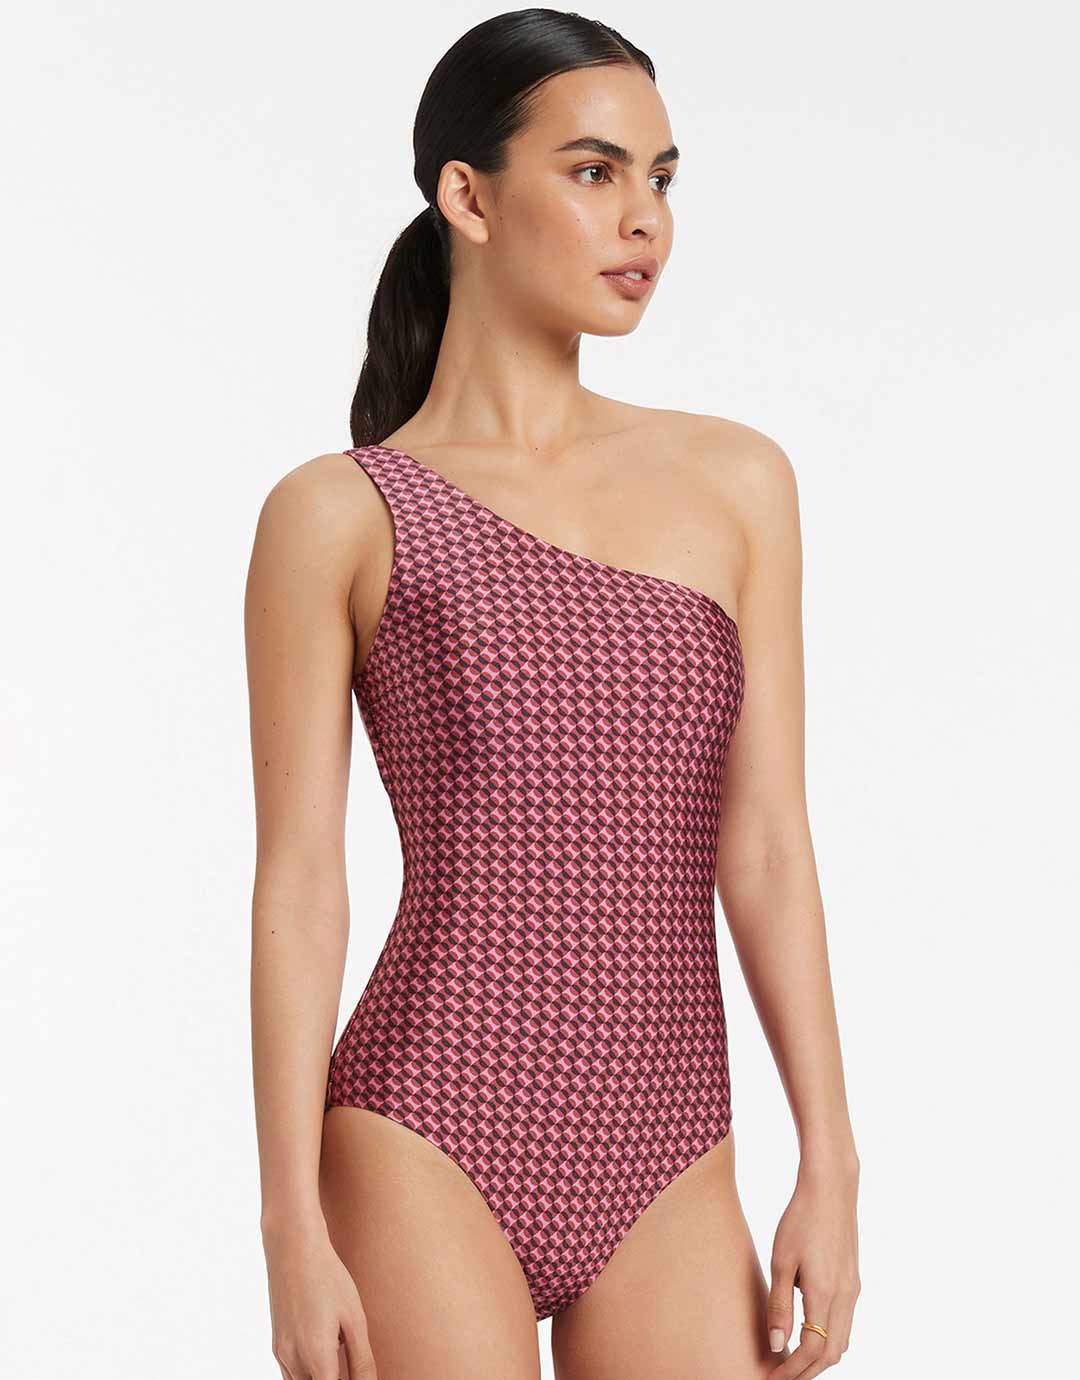 Lalita One Shoulder Swimsuit - Orchid - Simply Beach UK